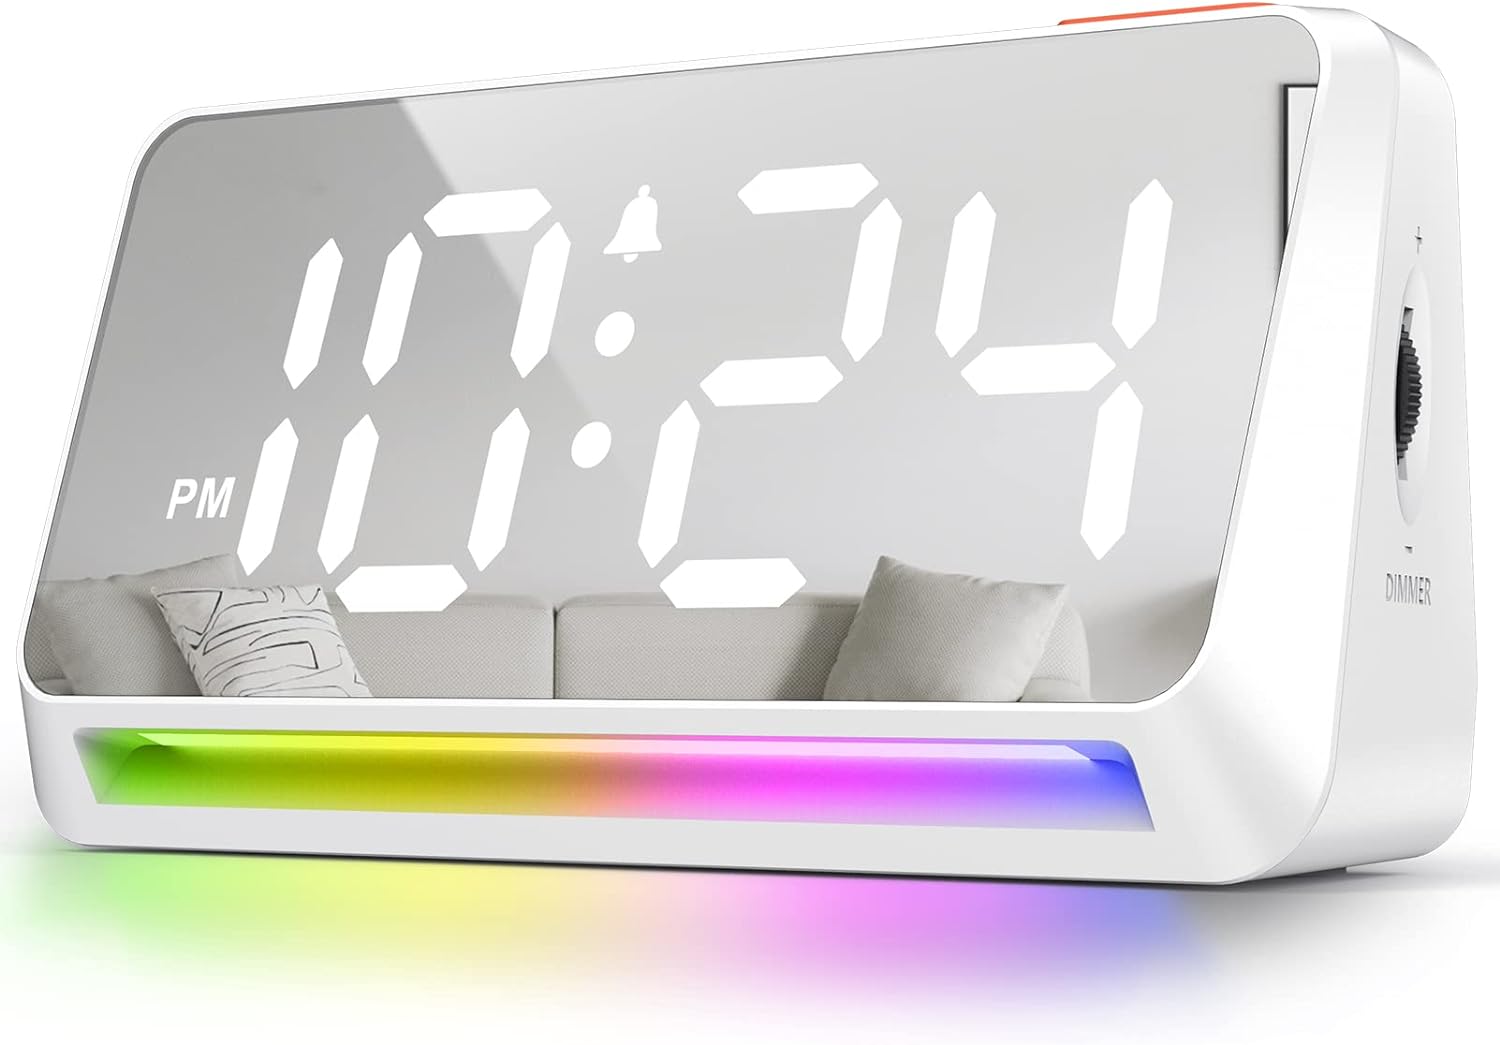 [Mirror] Super Loud Alarm Clock for Bedroom, Heavy Sleepers, Adults, Teens, Kids | Small Bedside Digital Clock with Dynamic RGB Night Light, LED Display, USB Charger, 12/24Hr, Snooze, Battery Backup